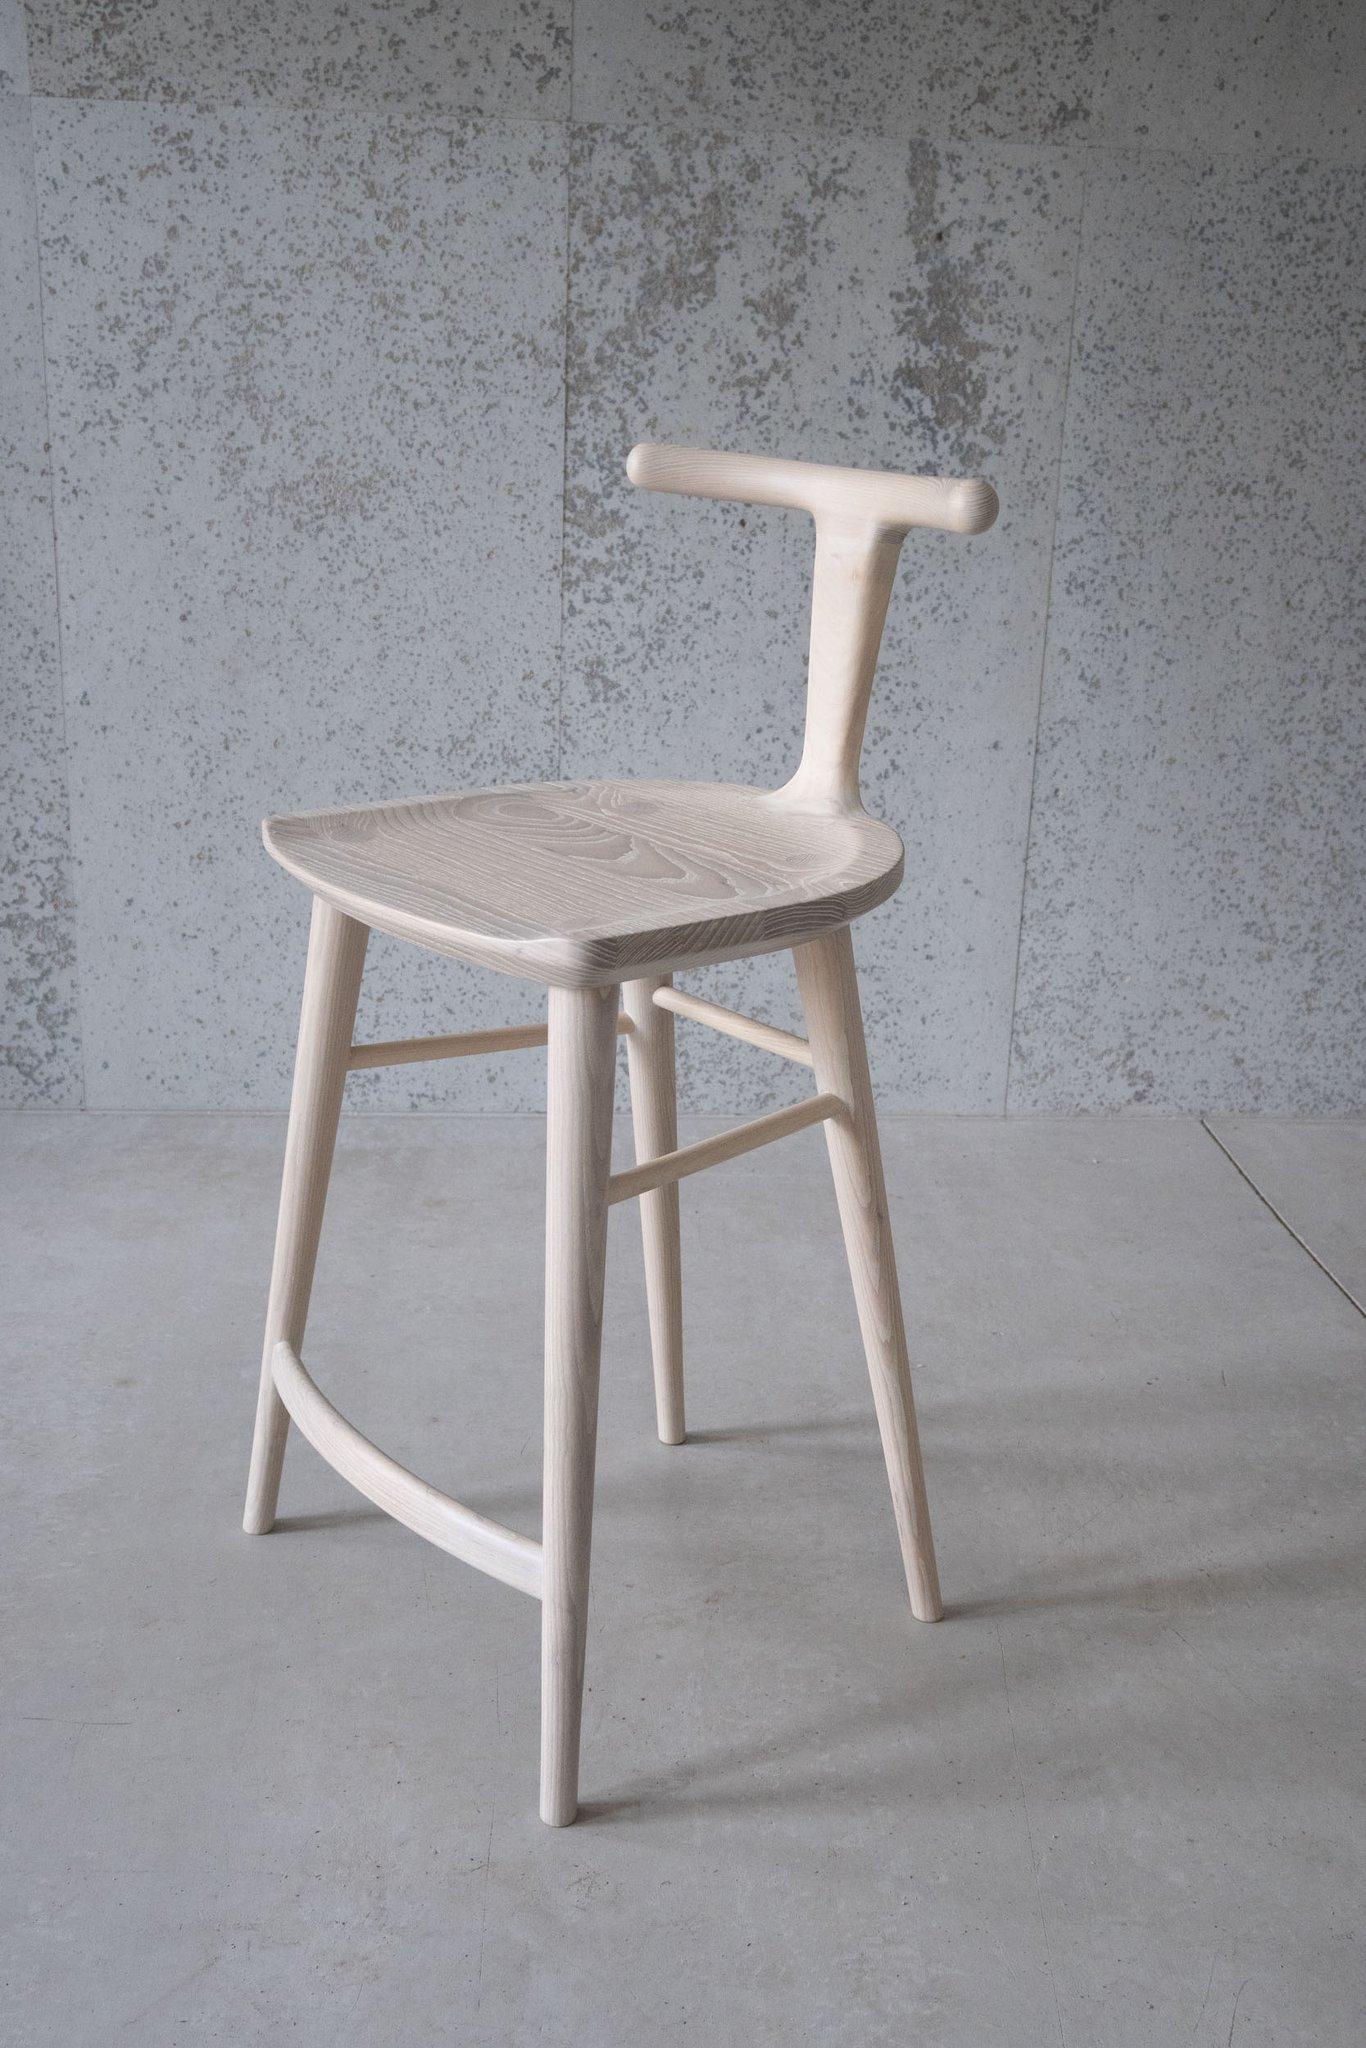 White ash oxbend stool by Fernweh Woodworking
Dimensions: 
Seat: W 17